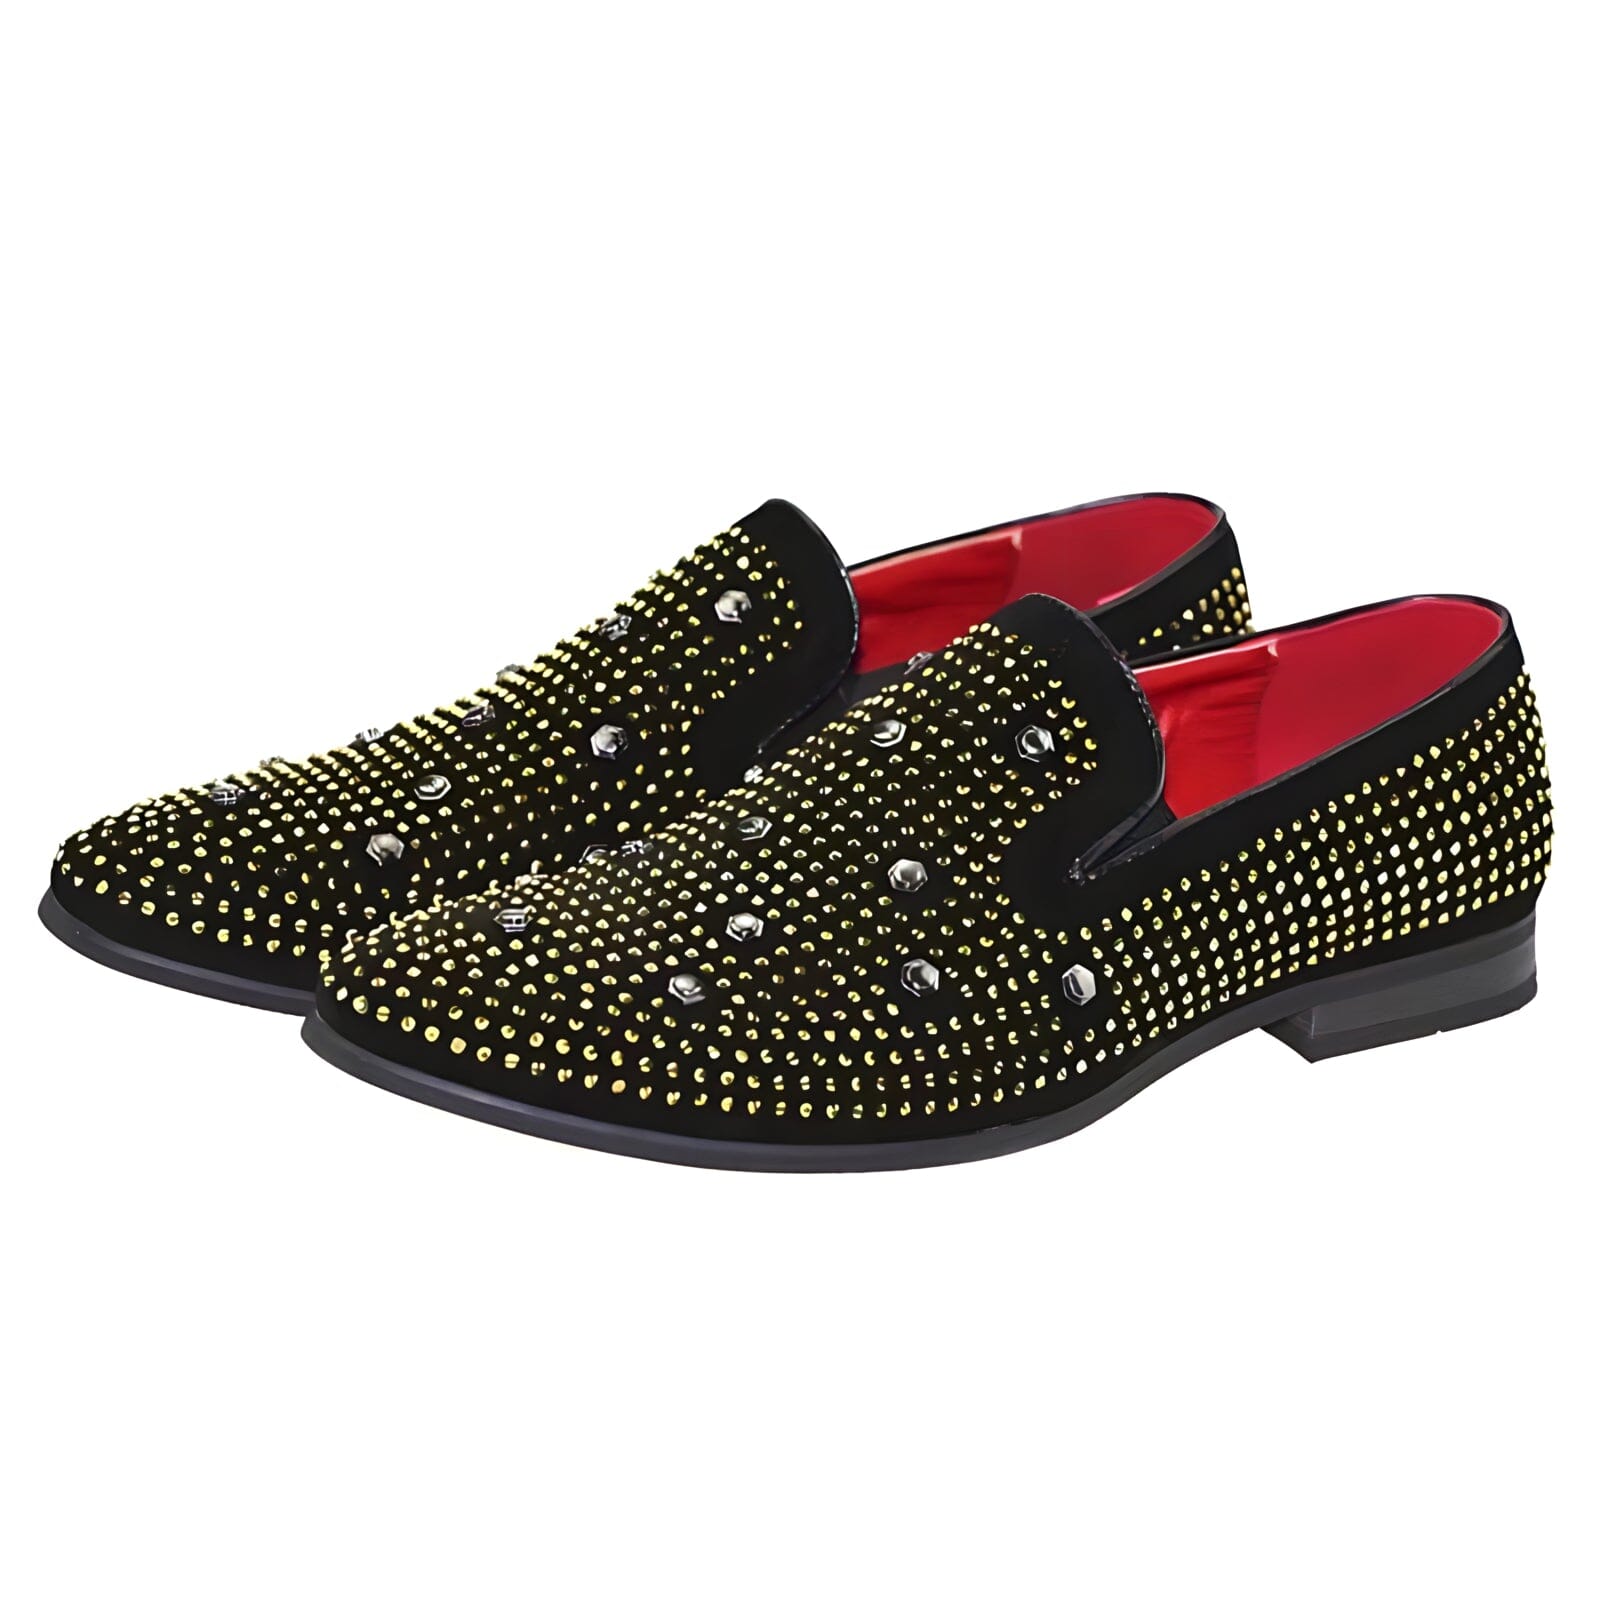 The Octave Crystal Studded Suede Penny Loafers WD Styles US 6 / EU 39 